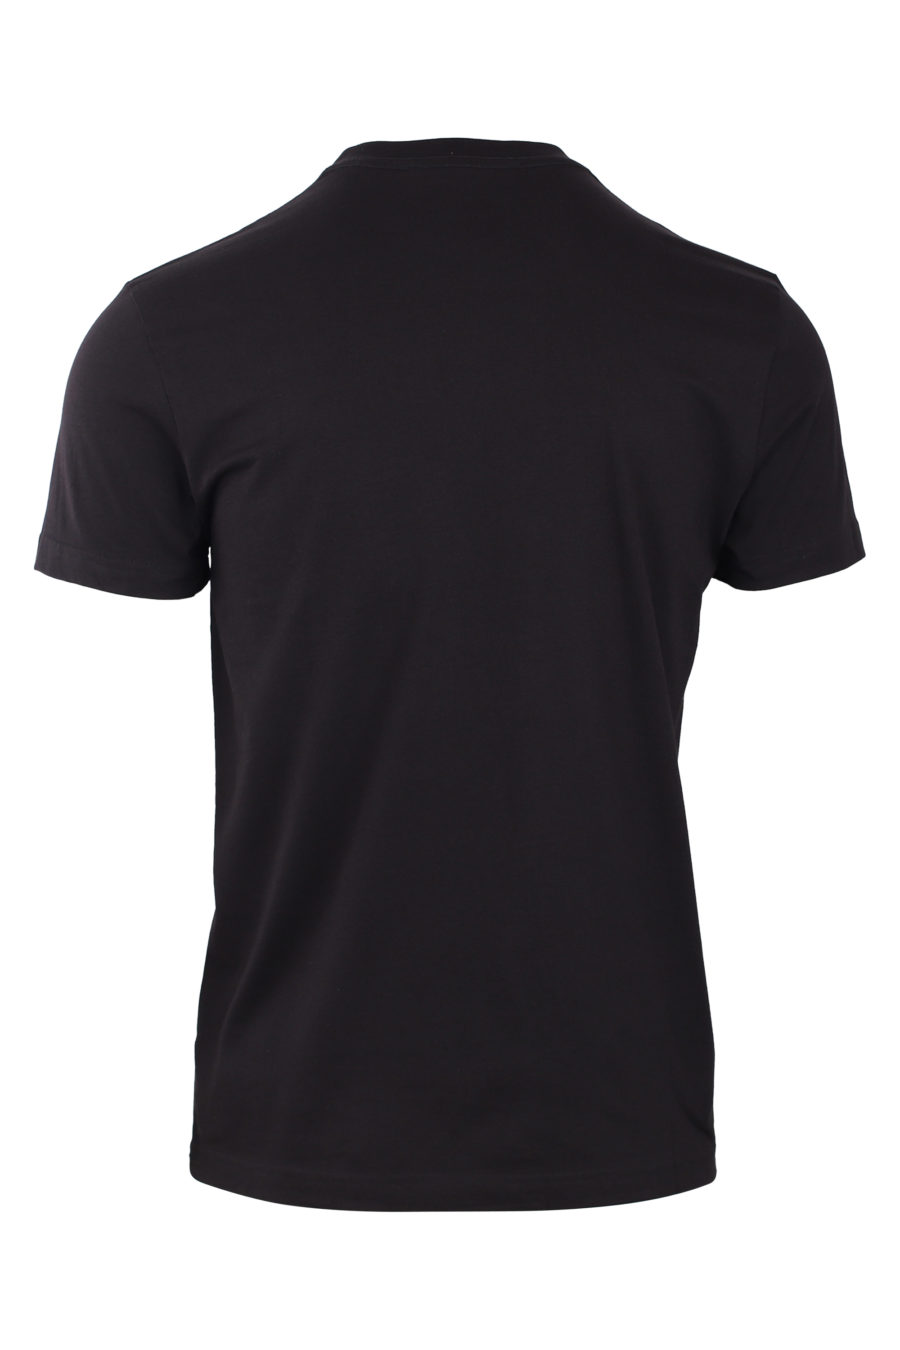 Black T-shirt with small triangle logo - IMG 0787